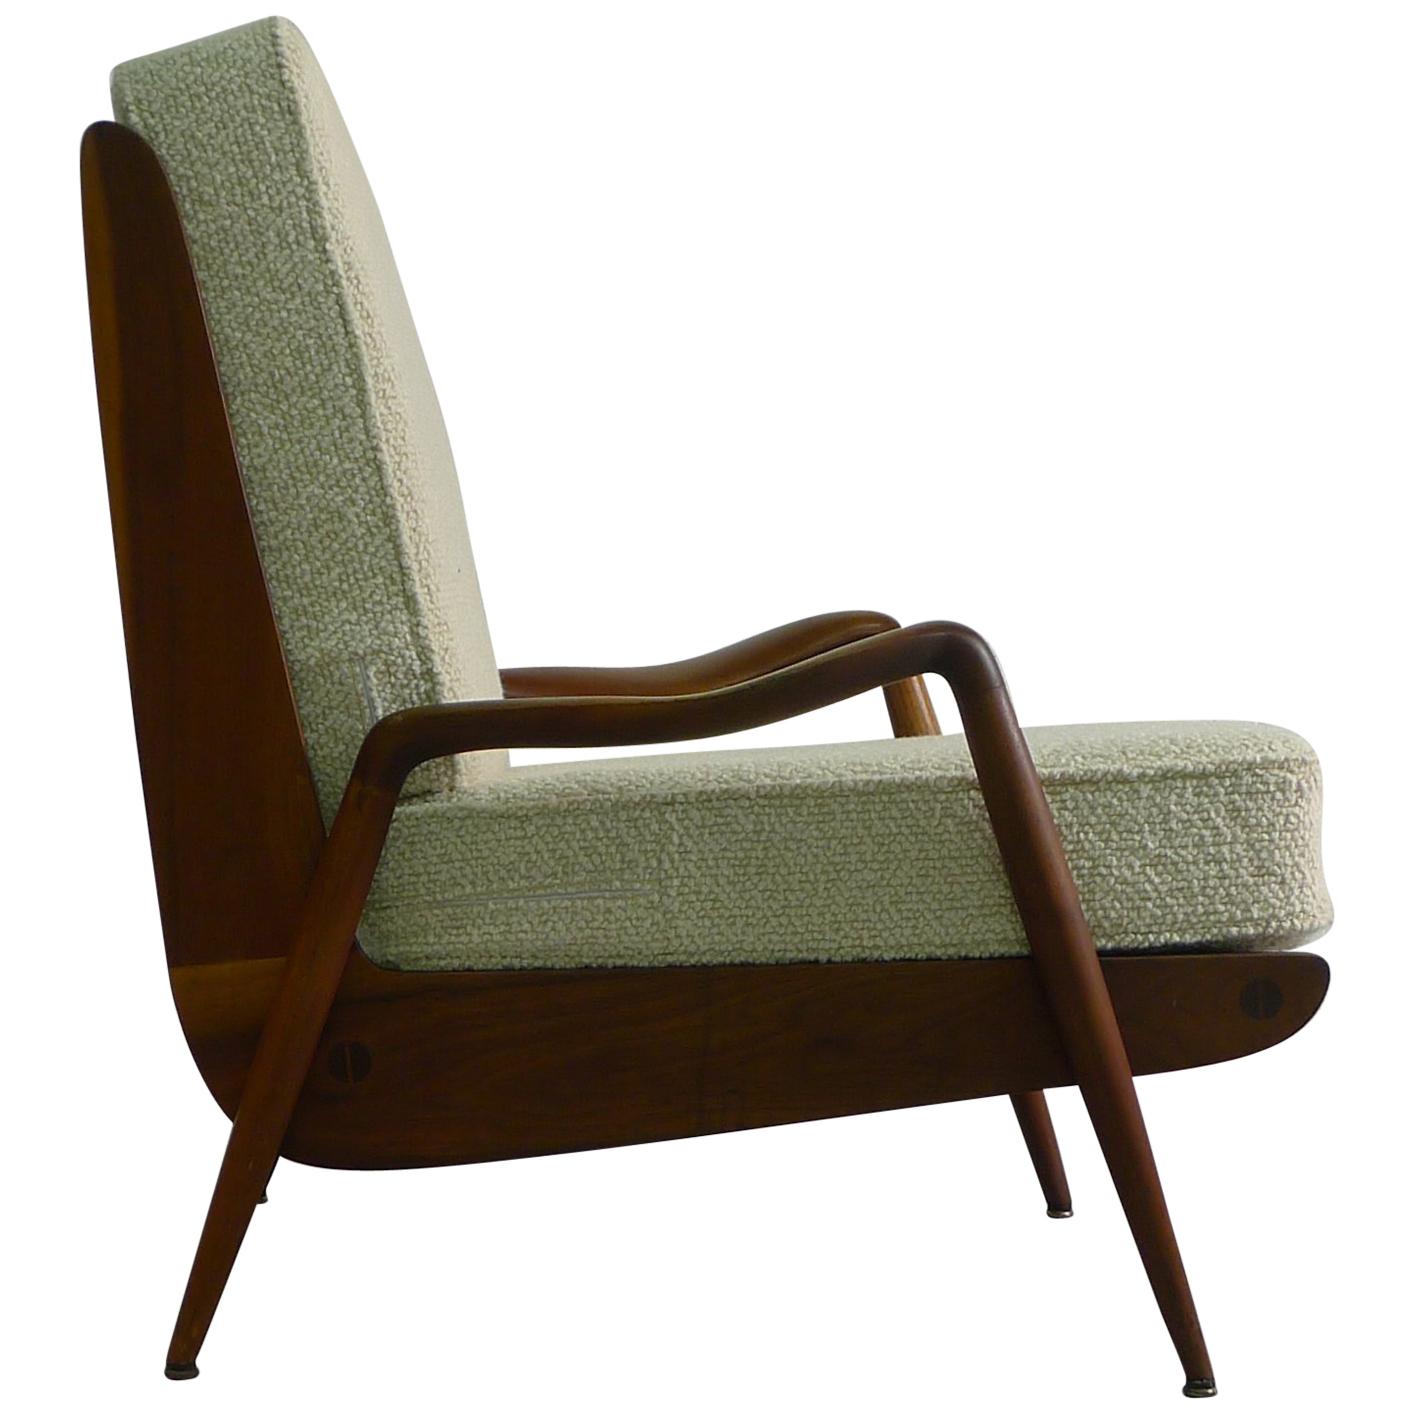 Phillip Lloyd Powell, 1960s American Walnut Lounge Chair with White Cushions